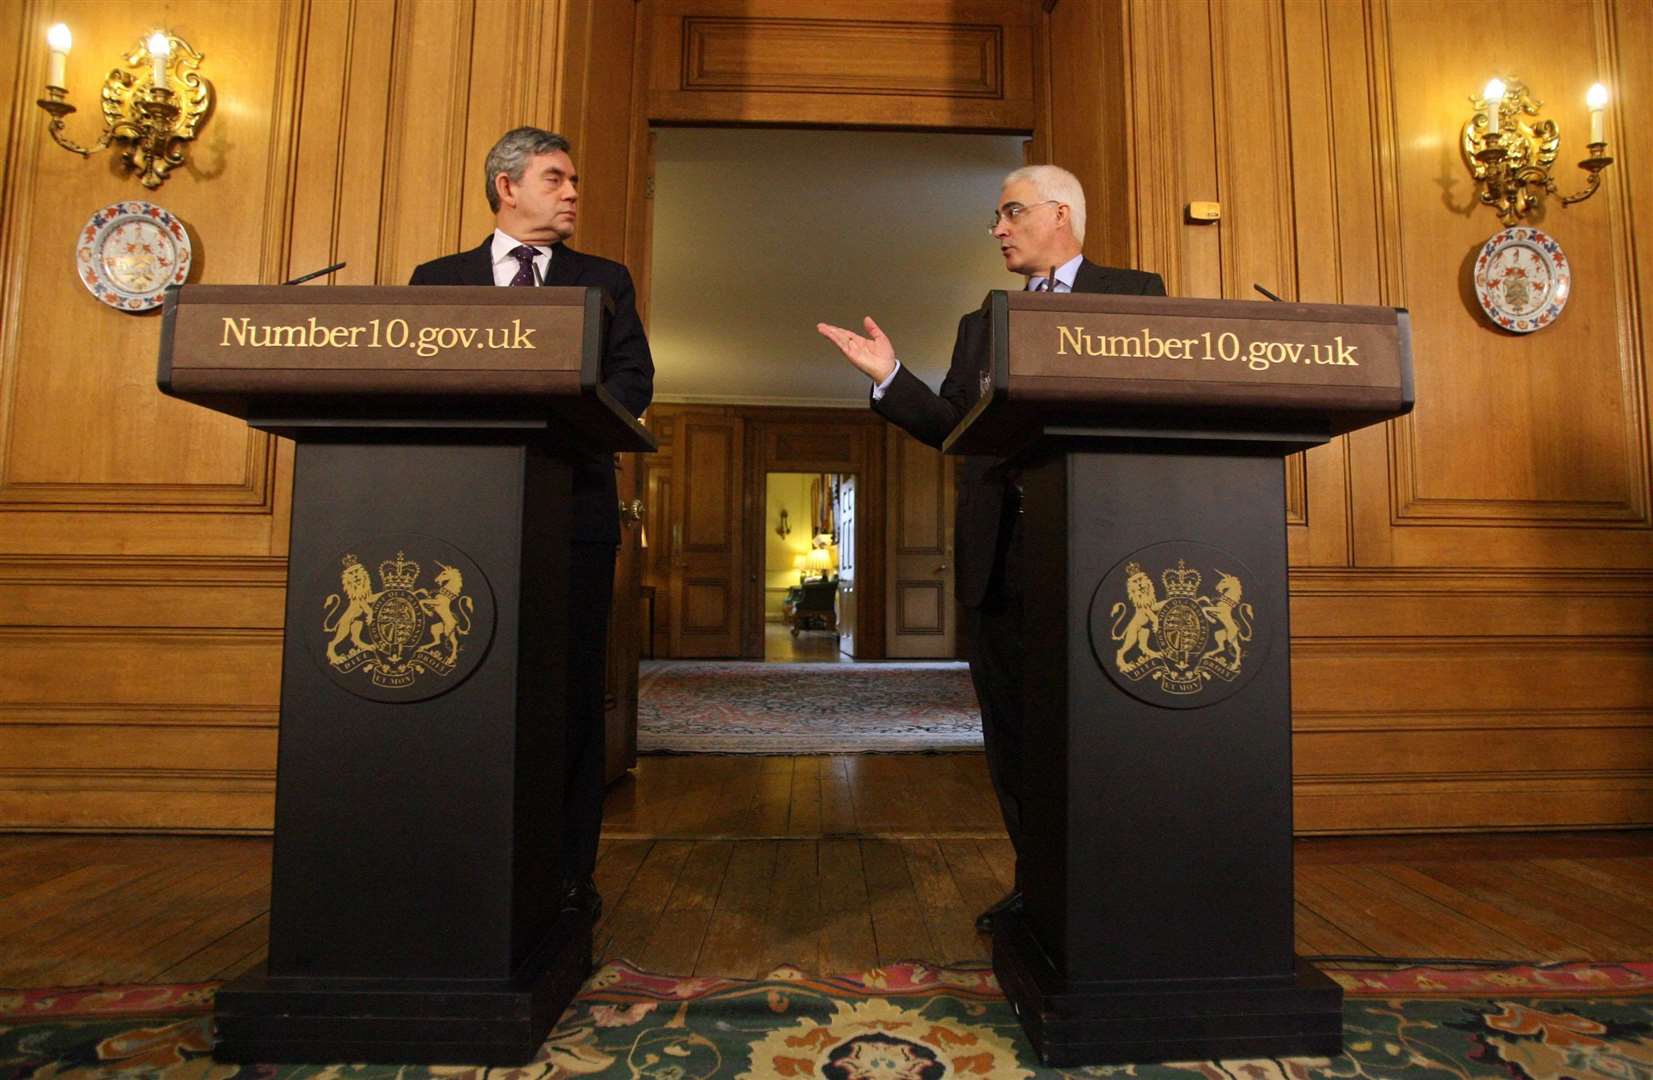 Gordon Brown and Alistair Darling during a press conference at Downing Street, London (Lewis Whyld/PA)